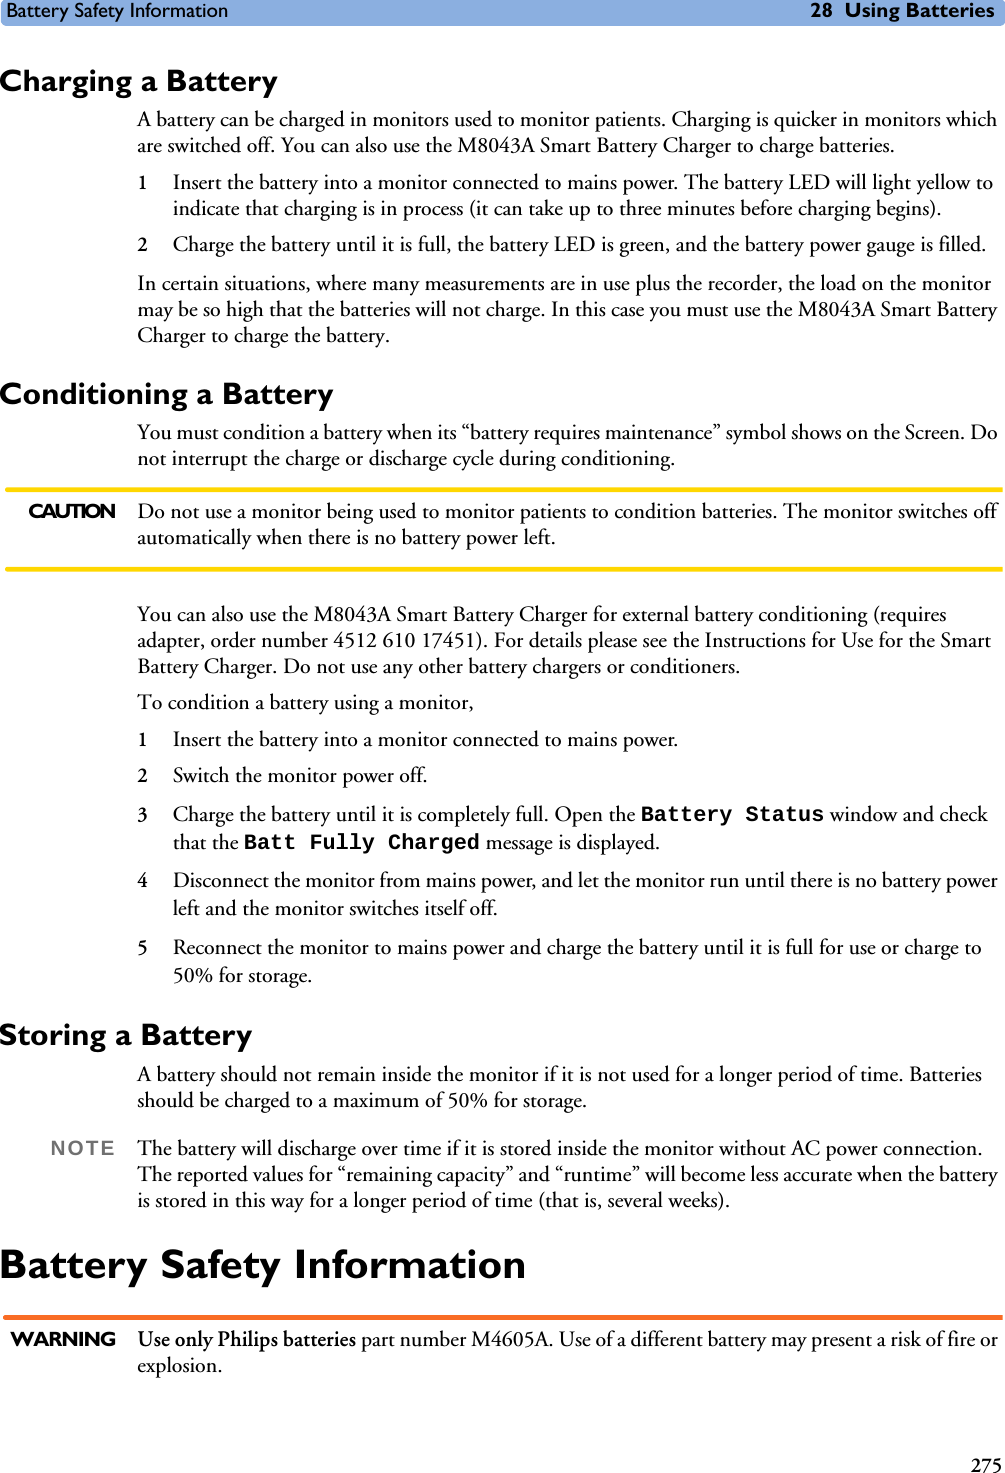 Battery Safety Information 28 Using Batteries275Charging a BatteryA battery can be charged in monitors used to monitor patients. Charging is quicker in monitors which are switched off. You can also use the M8043A Smart Battery Charger to charge batteries.1Insert the battery into a monitor connected to mains power. The battery LED will light yellow to indicate that charging is in process (it can take up to three minutes before charging begins). 2Charge the battery until it is full, the battery LED is green, and the battery power gauge is filled.In certain situations, where many measurements are in use plus the recorder, the load on the monitor may be so high that the batteries will not charge. In this case you must use the M8043A Smart Battery Charger to charge the battery.Conditioning a BatteryYou must condition a battery when its “battery requires maintenance” symbol shows on the Screen. Do not interrupt the charge or discharge cycle during conditioning. CAUTION Do not use a monitor being used to monitor patients to condition batteries. The monitor switches off automatically when there is no battery power left.You can also use the M8043A Smart Battery Charger for external battery conditioning (requires adapter, order number 4512 610 17451). For details please see the Instructions for Use for the Smart Battery Charger. Do not use any other battery chargers or conditioners.To condition a battery using a monitor, 1Insert the battery into a monitor connected to mains power.2Switch the monitor power off.3Charge the battery until it is completely full. Open the Battery Status window and check that the Batt Fully Charged message is displayed. 4Disconnect the monitor from mains power, and let the monitor run until there is no battery power left and the monitor switches itself off.5Reconnect the monitor to mains power and charge the battery until it is full for use or charge to 50% for storage.Storing a BatteryA battery should not remain inside the monitor if it is not used for a longer period of time. Batteries should be charged to a maximum of 50% for storage. NOTE The battery will discharge over time if it is stored inside the monitor without AC power connection. The reported values for “remaining capacity” and “runtime” will become less accurate when the battery is stored in this way for a longer period of time (that is, several weeks).Battery Safety InformationWARNING Use only Philips batteries part number M4605A. Use of a different battery may present a risk of fire or explosion.